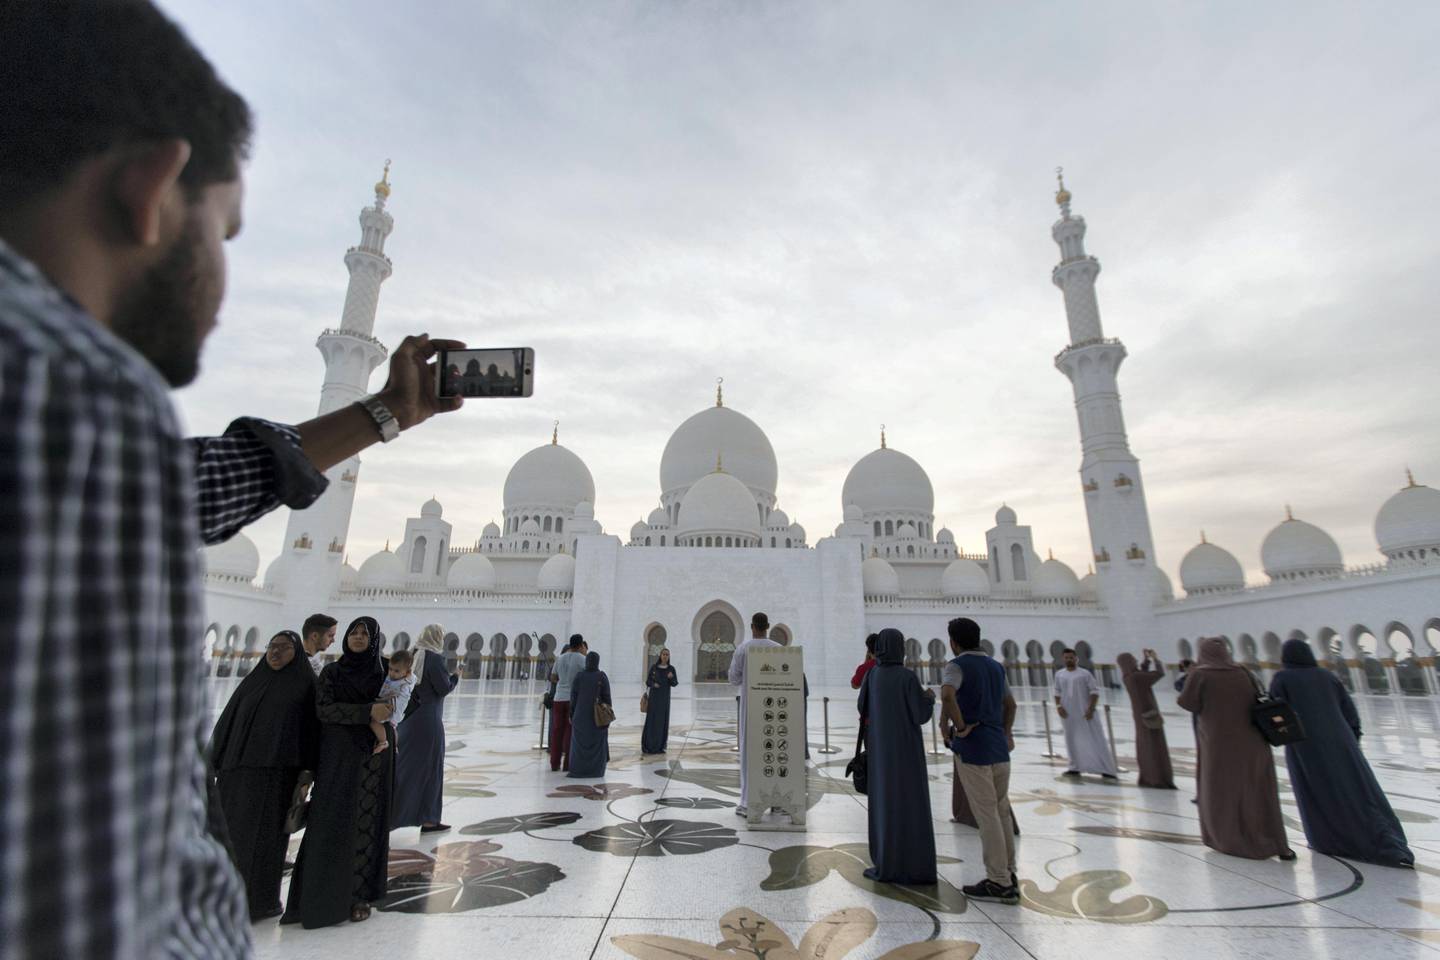 Abu Dhabi, United Arab Emirates, August 31, 2017:    A tourist takes a picture with a smartphone as the sun sets over Sheikh Zayed Grand Mosque ahead of Eid al-Adha in Abu Dhabi on August 31, 2017. Eid al-Adha, or the, Feast of the Sacrifice, honors the willingness of Ibrahim to sacrifice his son Ismaeel, as an act of obedience to God's command. Christopher Pike / The National

Reporter:  N/A
Section: News